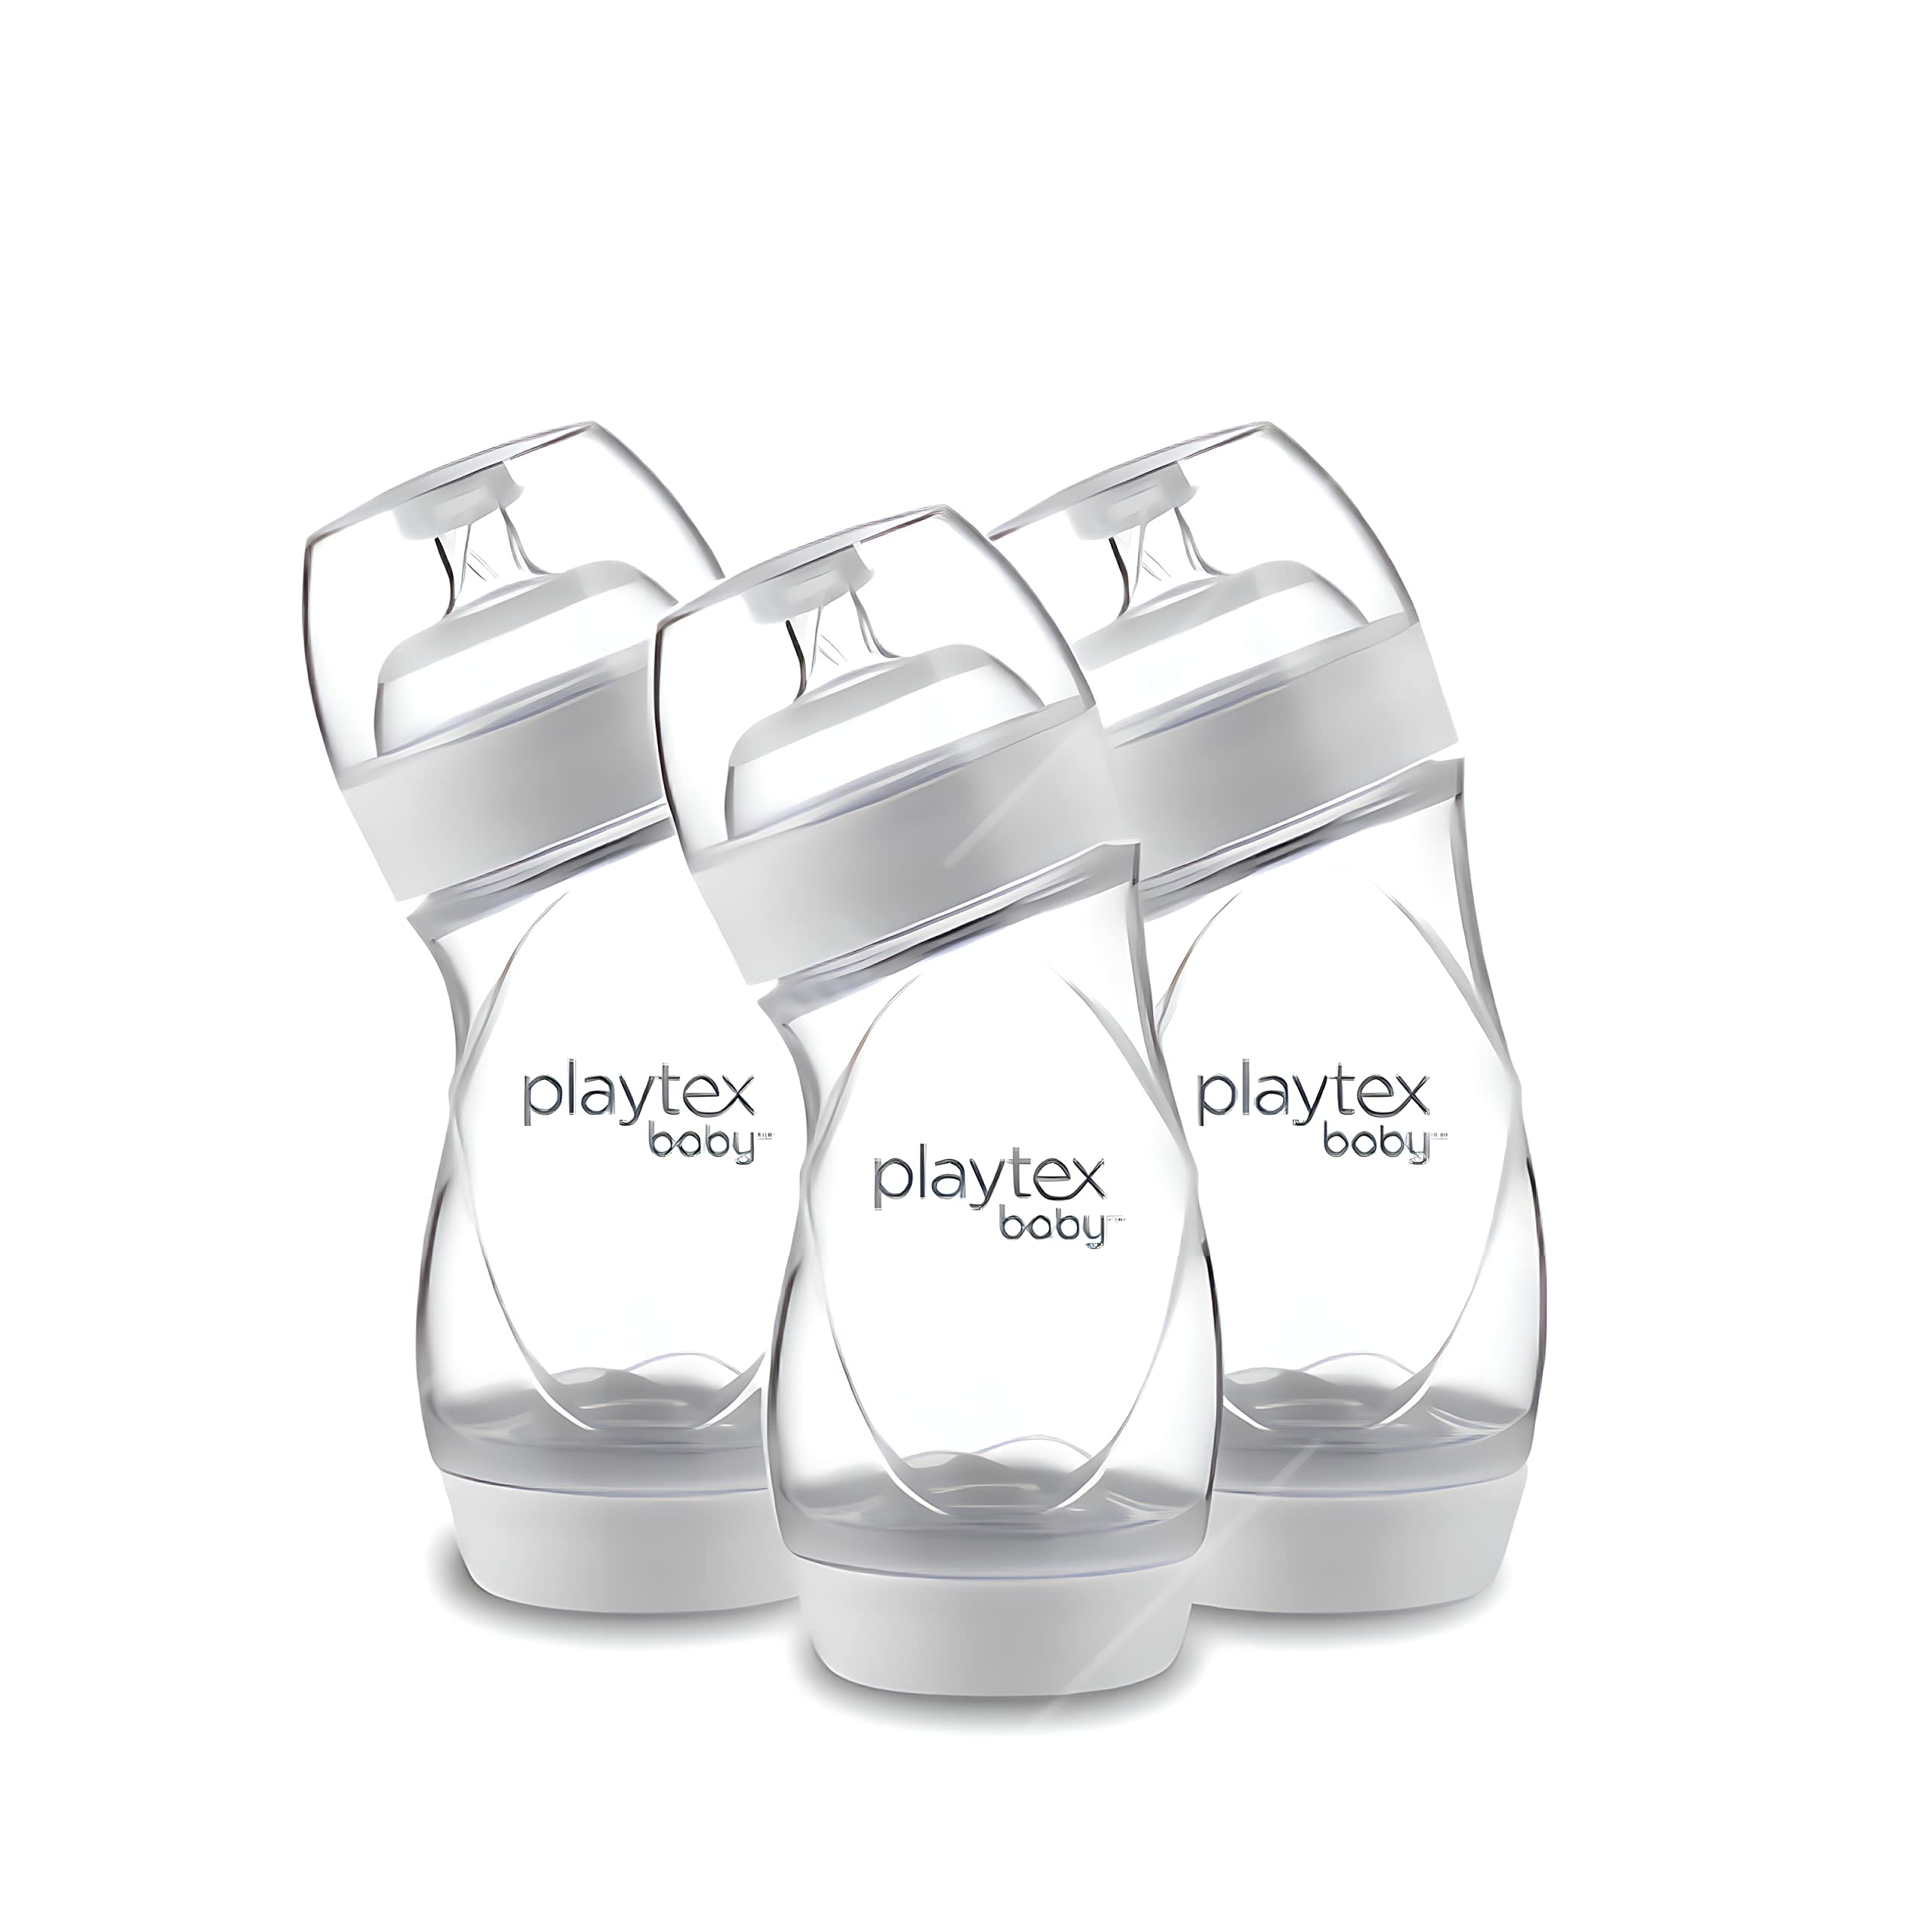 Playtex Baby Ventaire Bottle, Helps Prevent Colic & Reflux, 9 Ounce Bottles, 3 Count